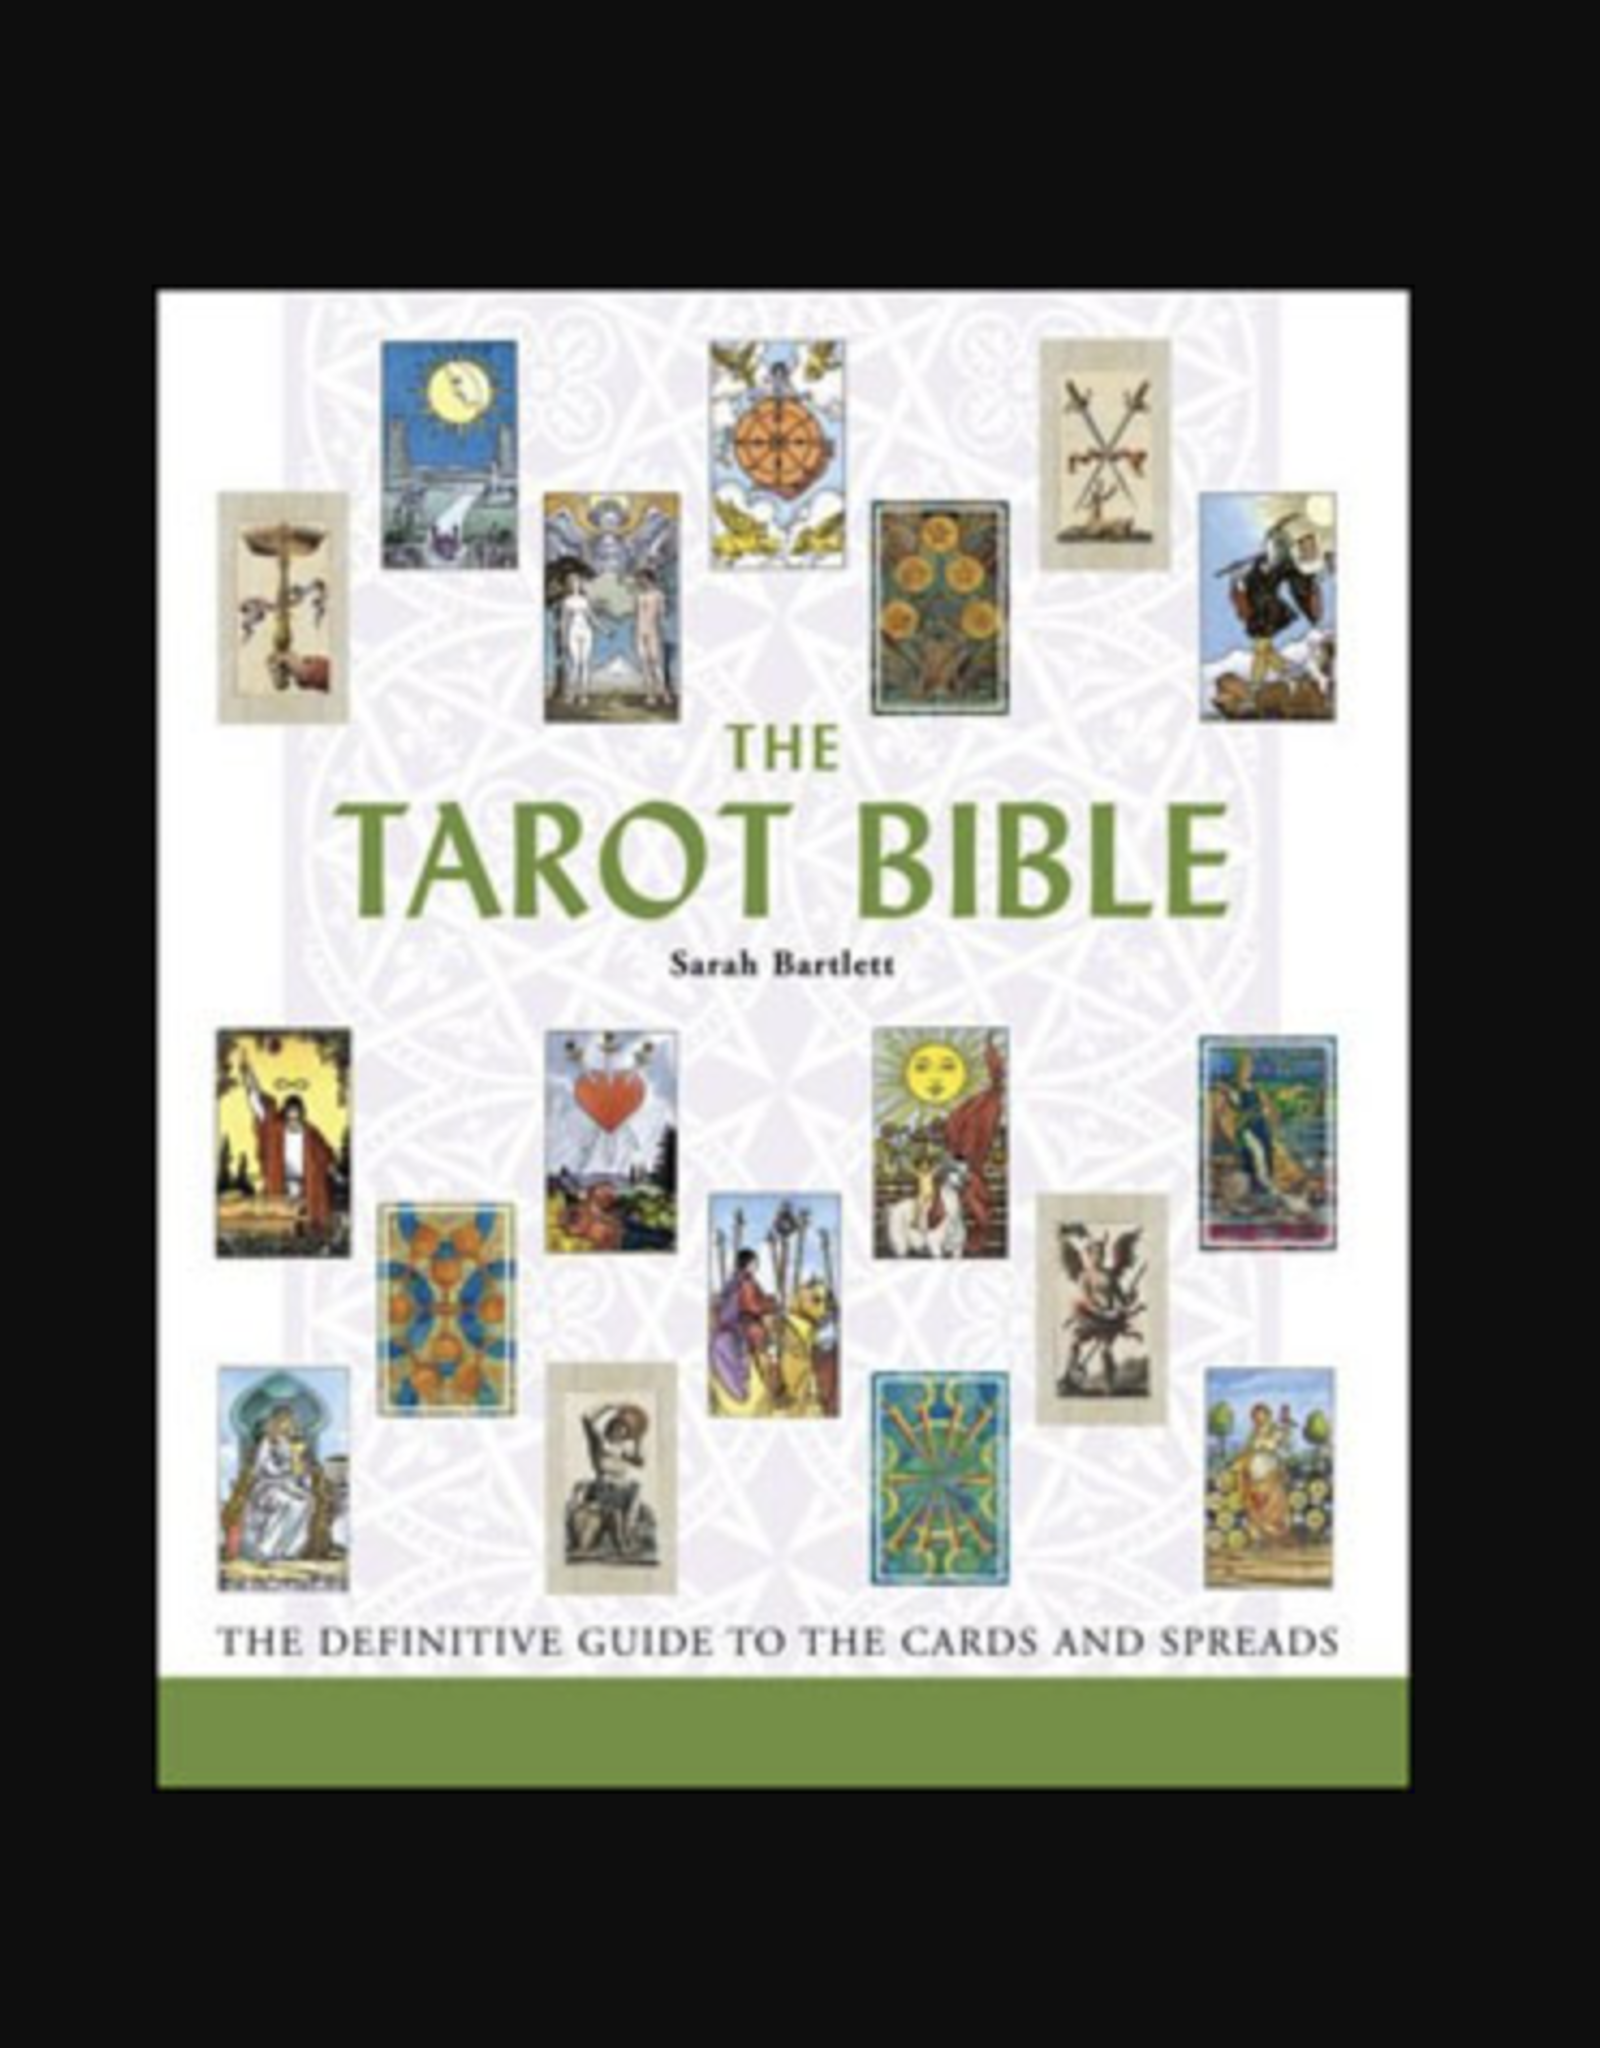 Tarot Bible - The Definitive Guide to the Cards and Spreads